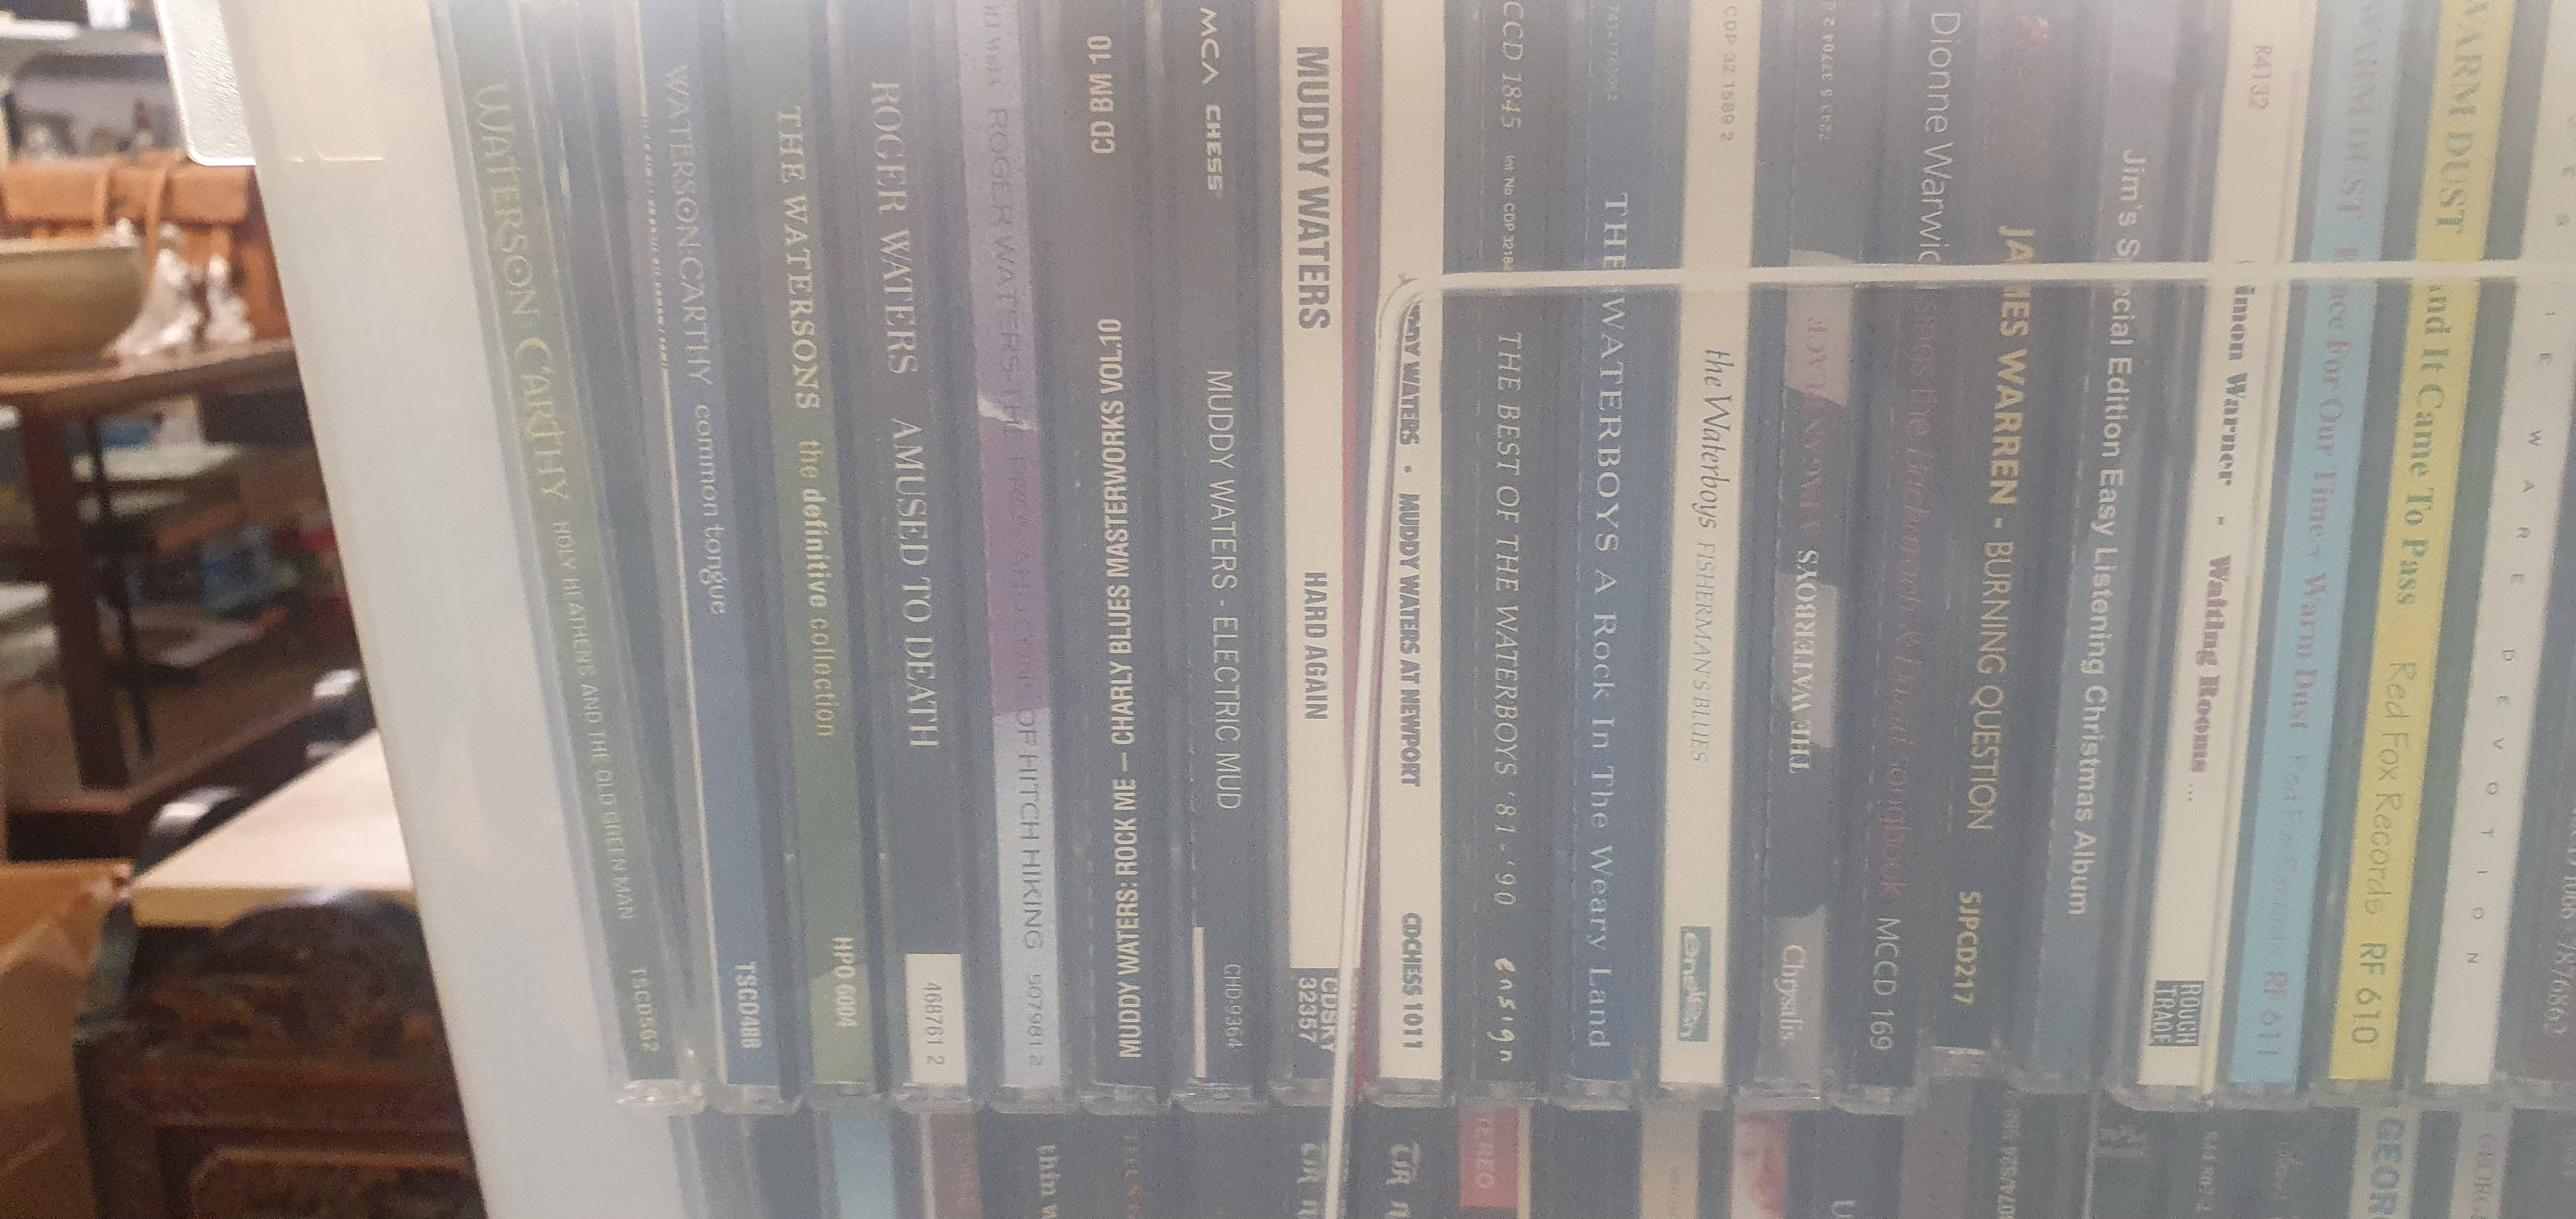 LARGE COLLECTION OF APPROXIMATELY 200 MUSIC CD'S - Image 2 of 9